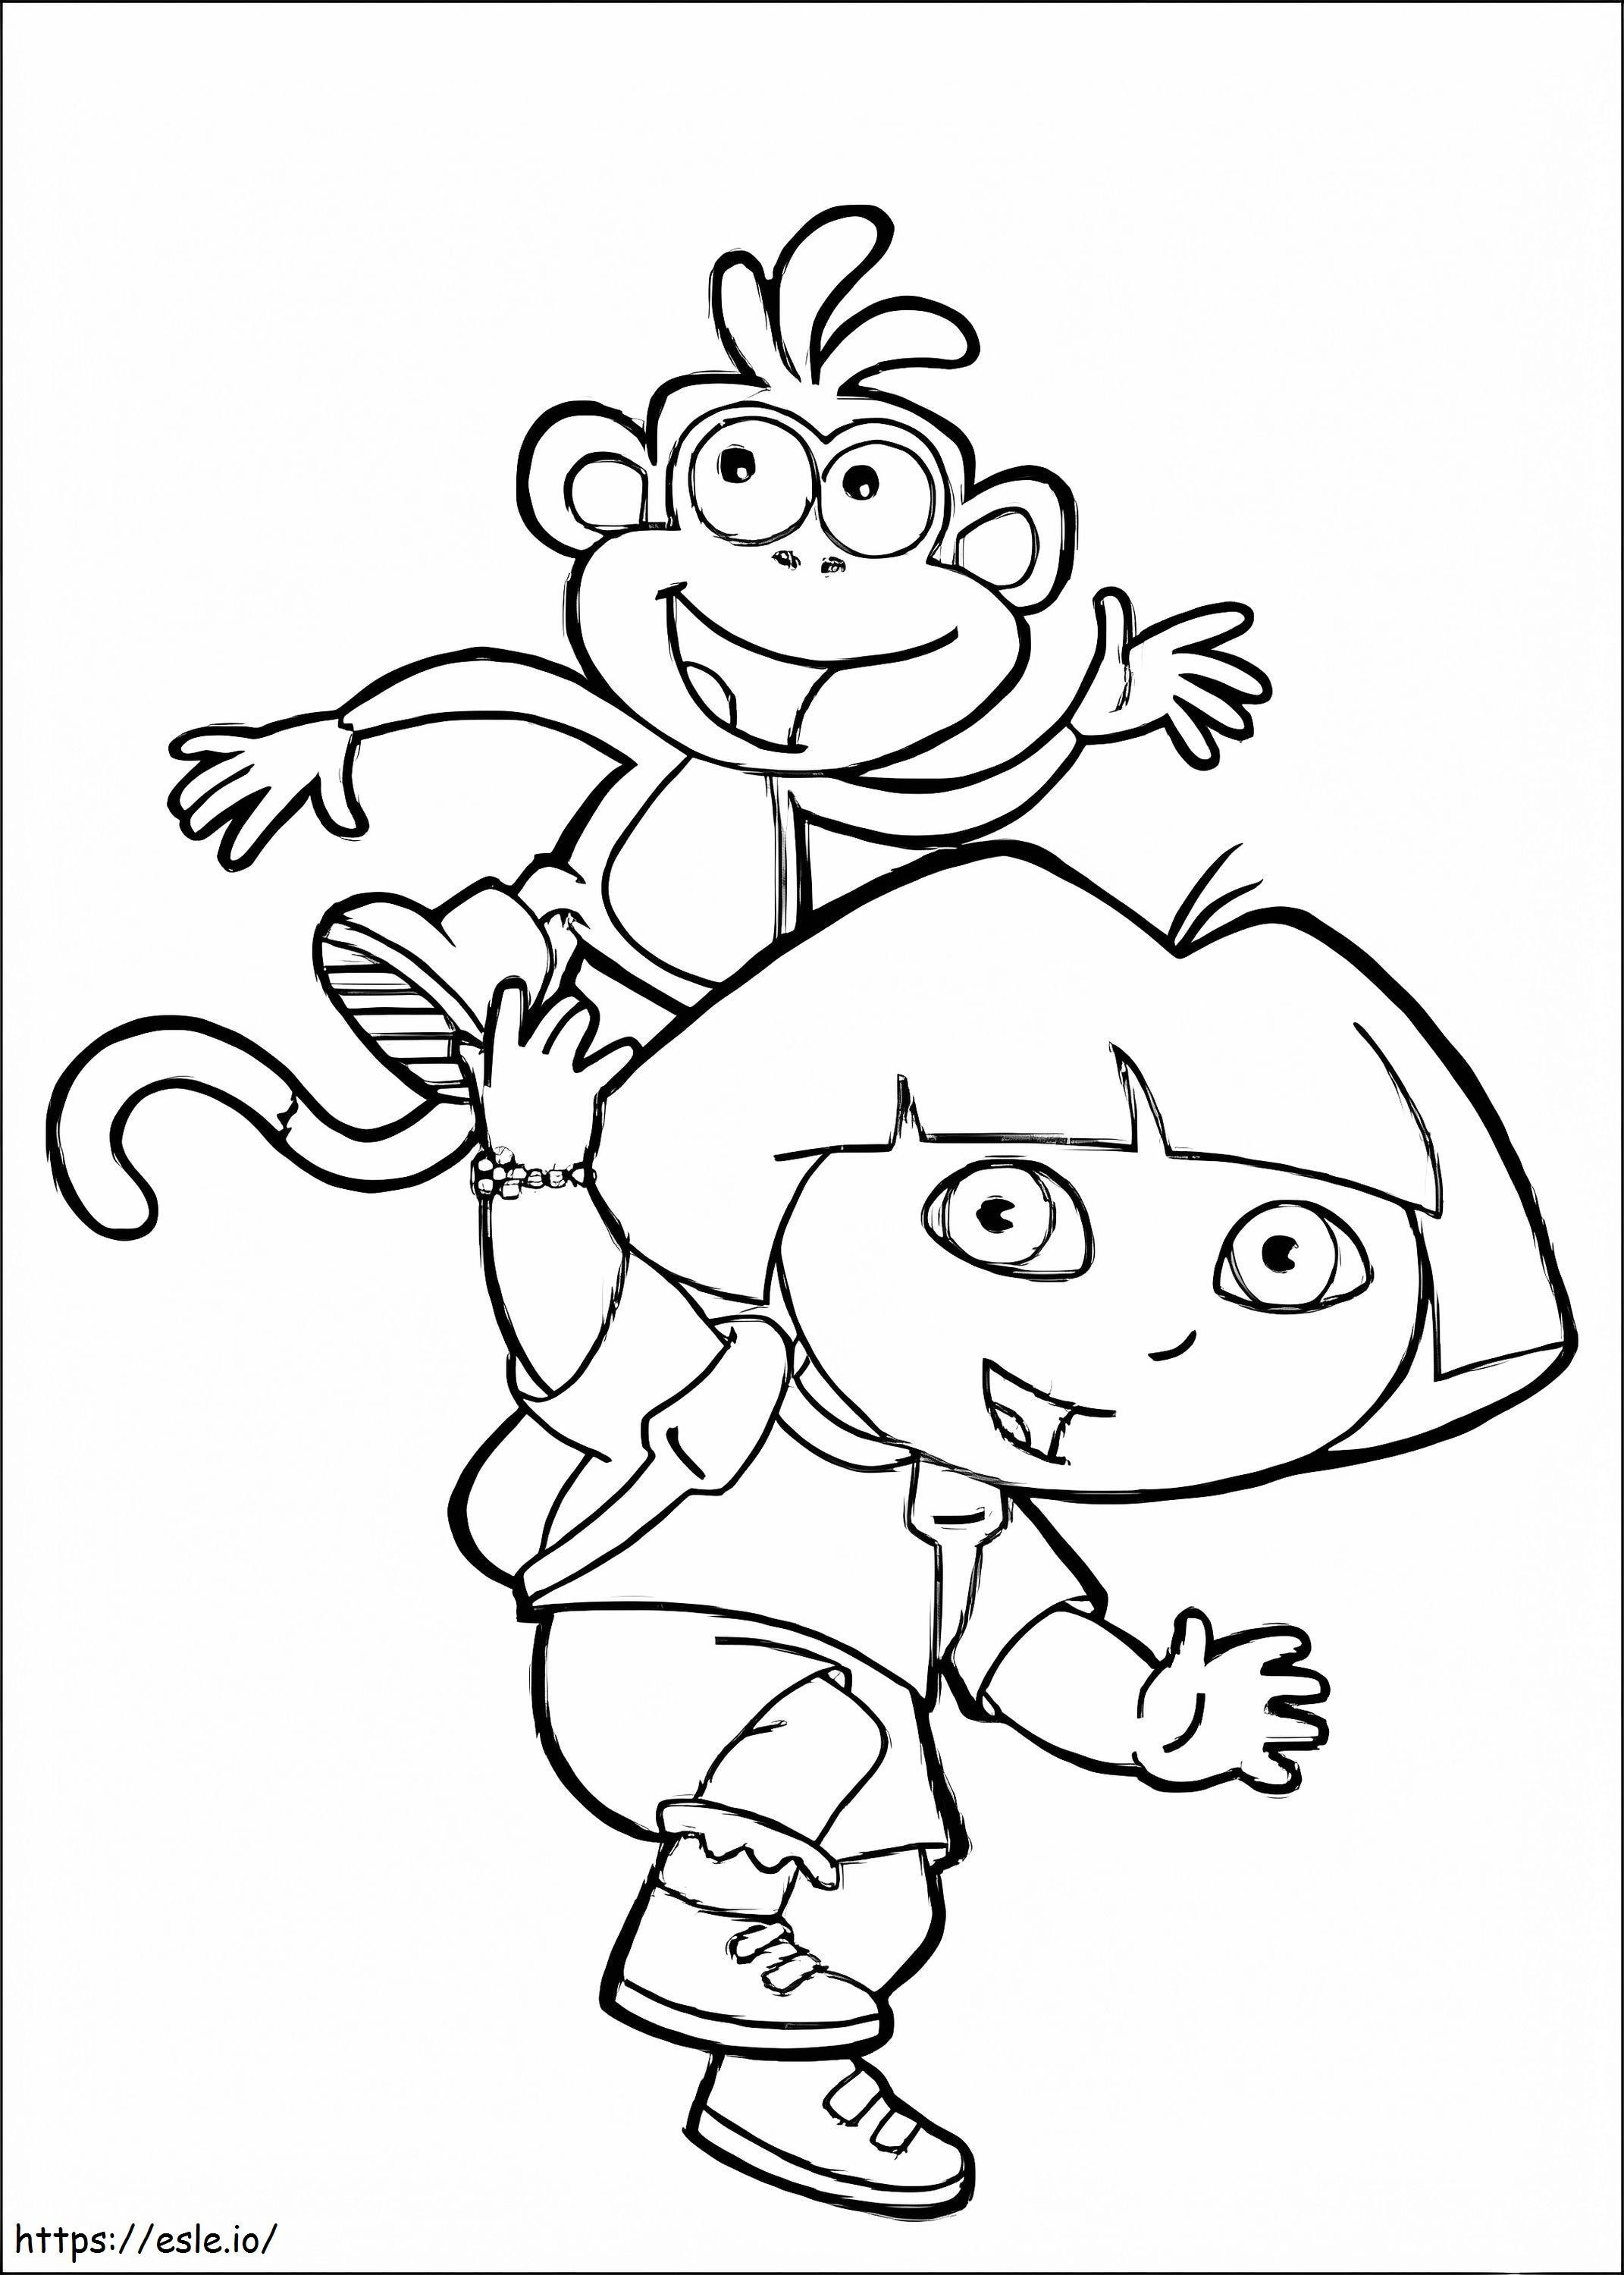 Dora And Boots 1 coloring page